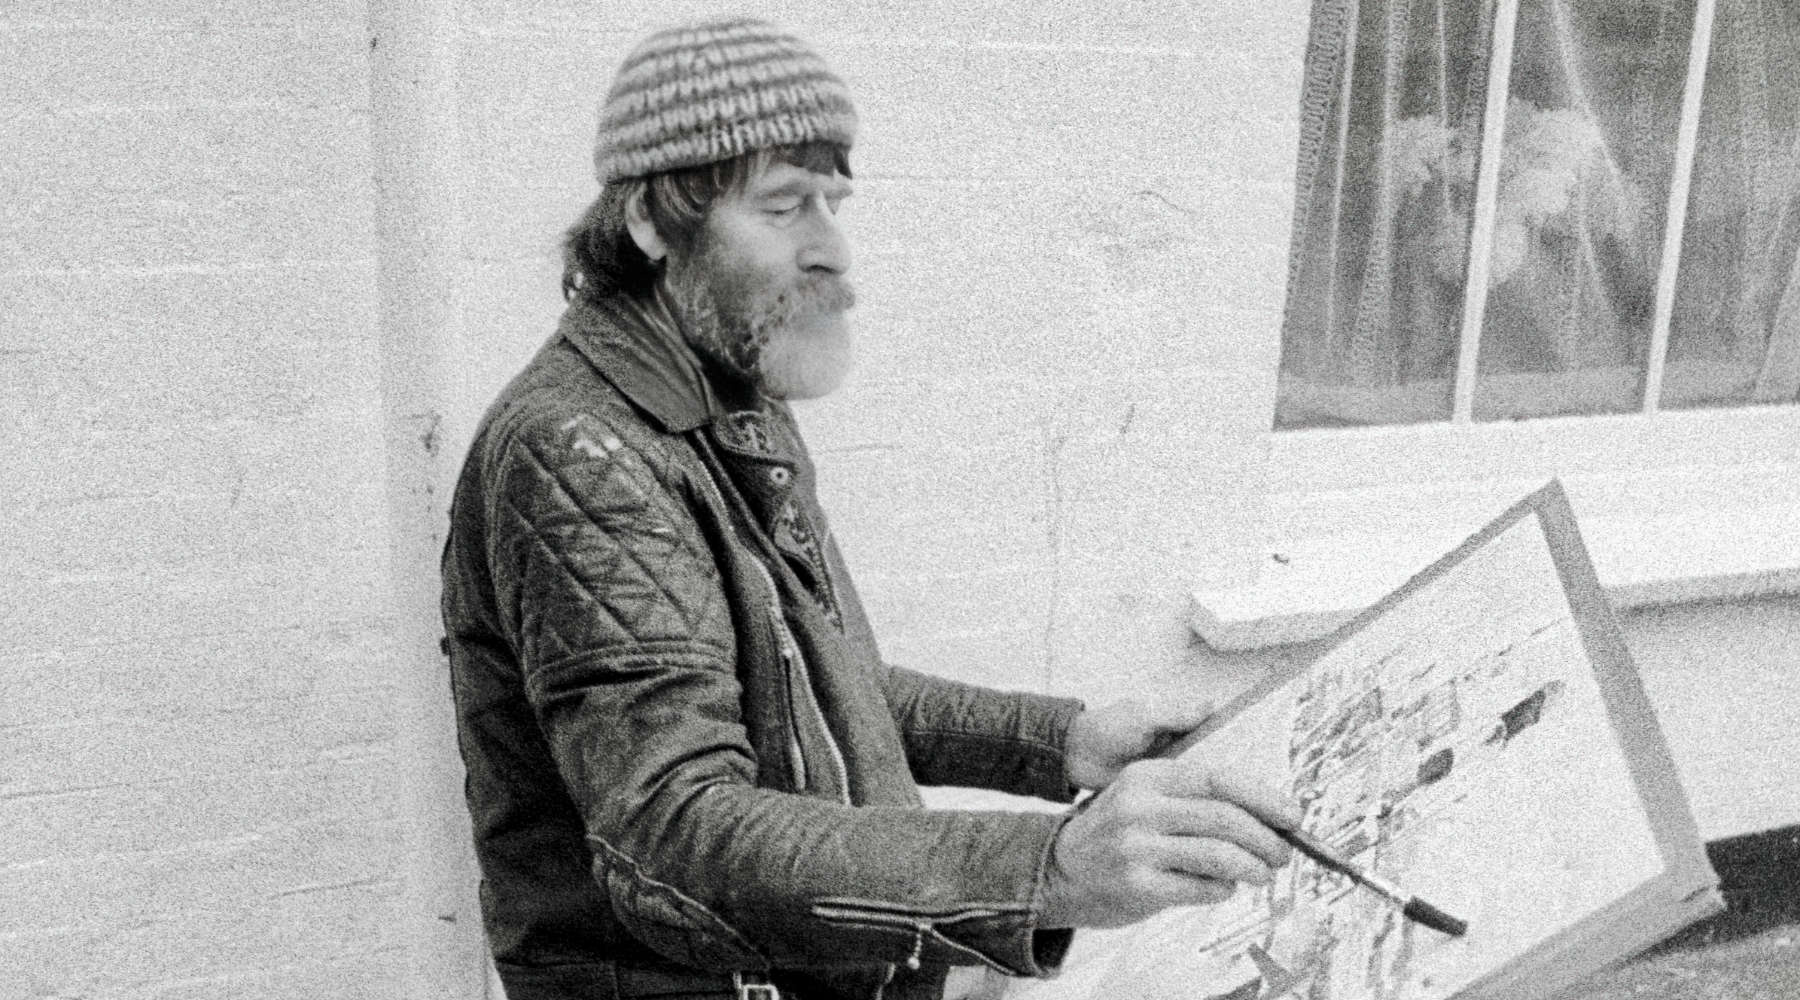 Cornish artist Fred Yates painting a watercolour in Falmouth. Photograph by artist John Dyer